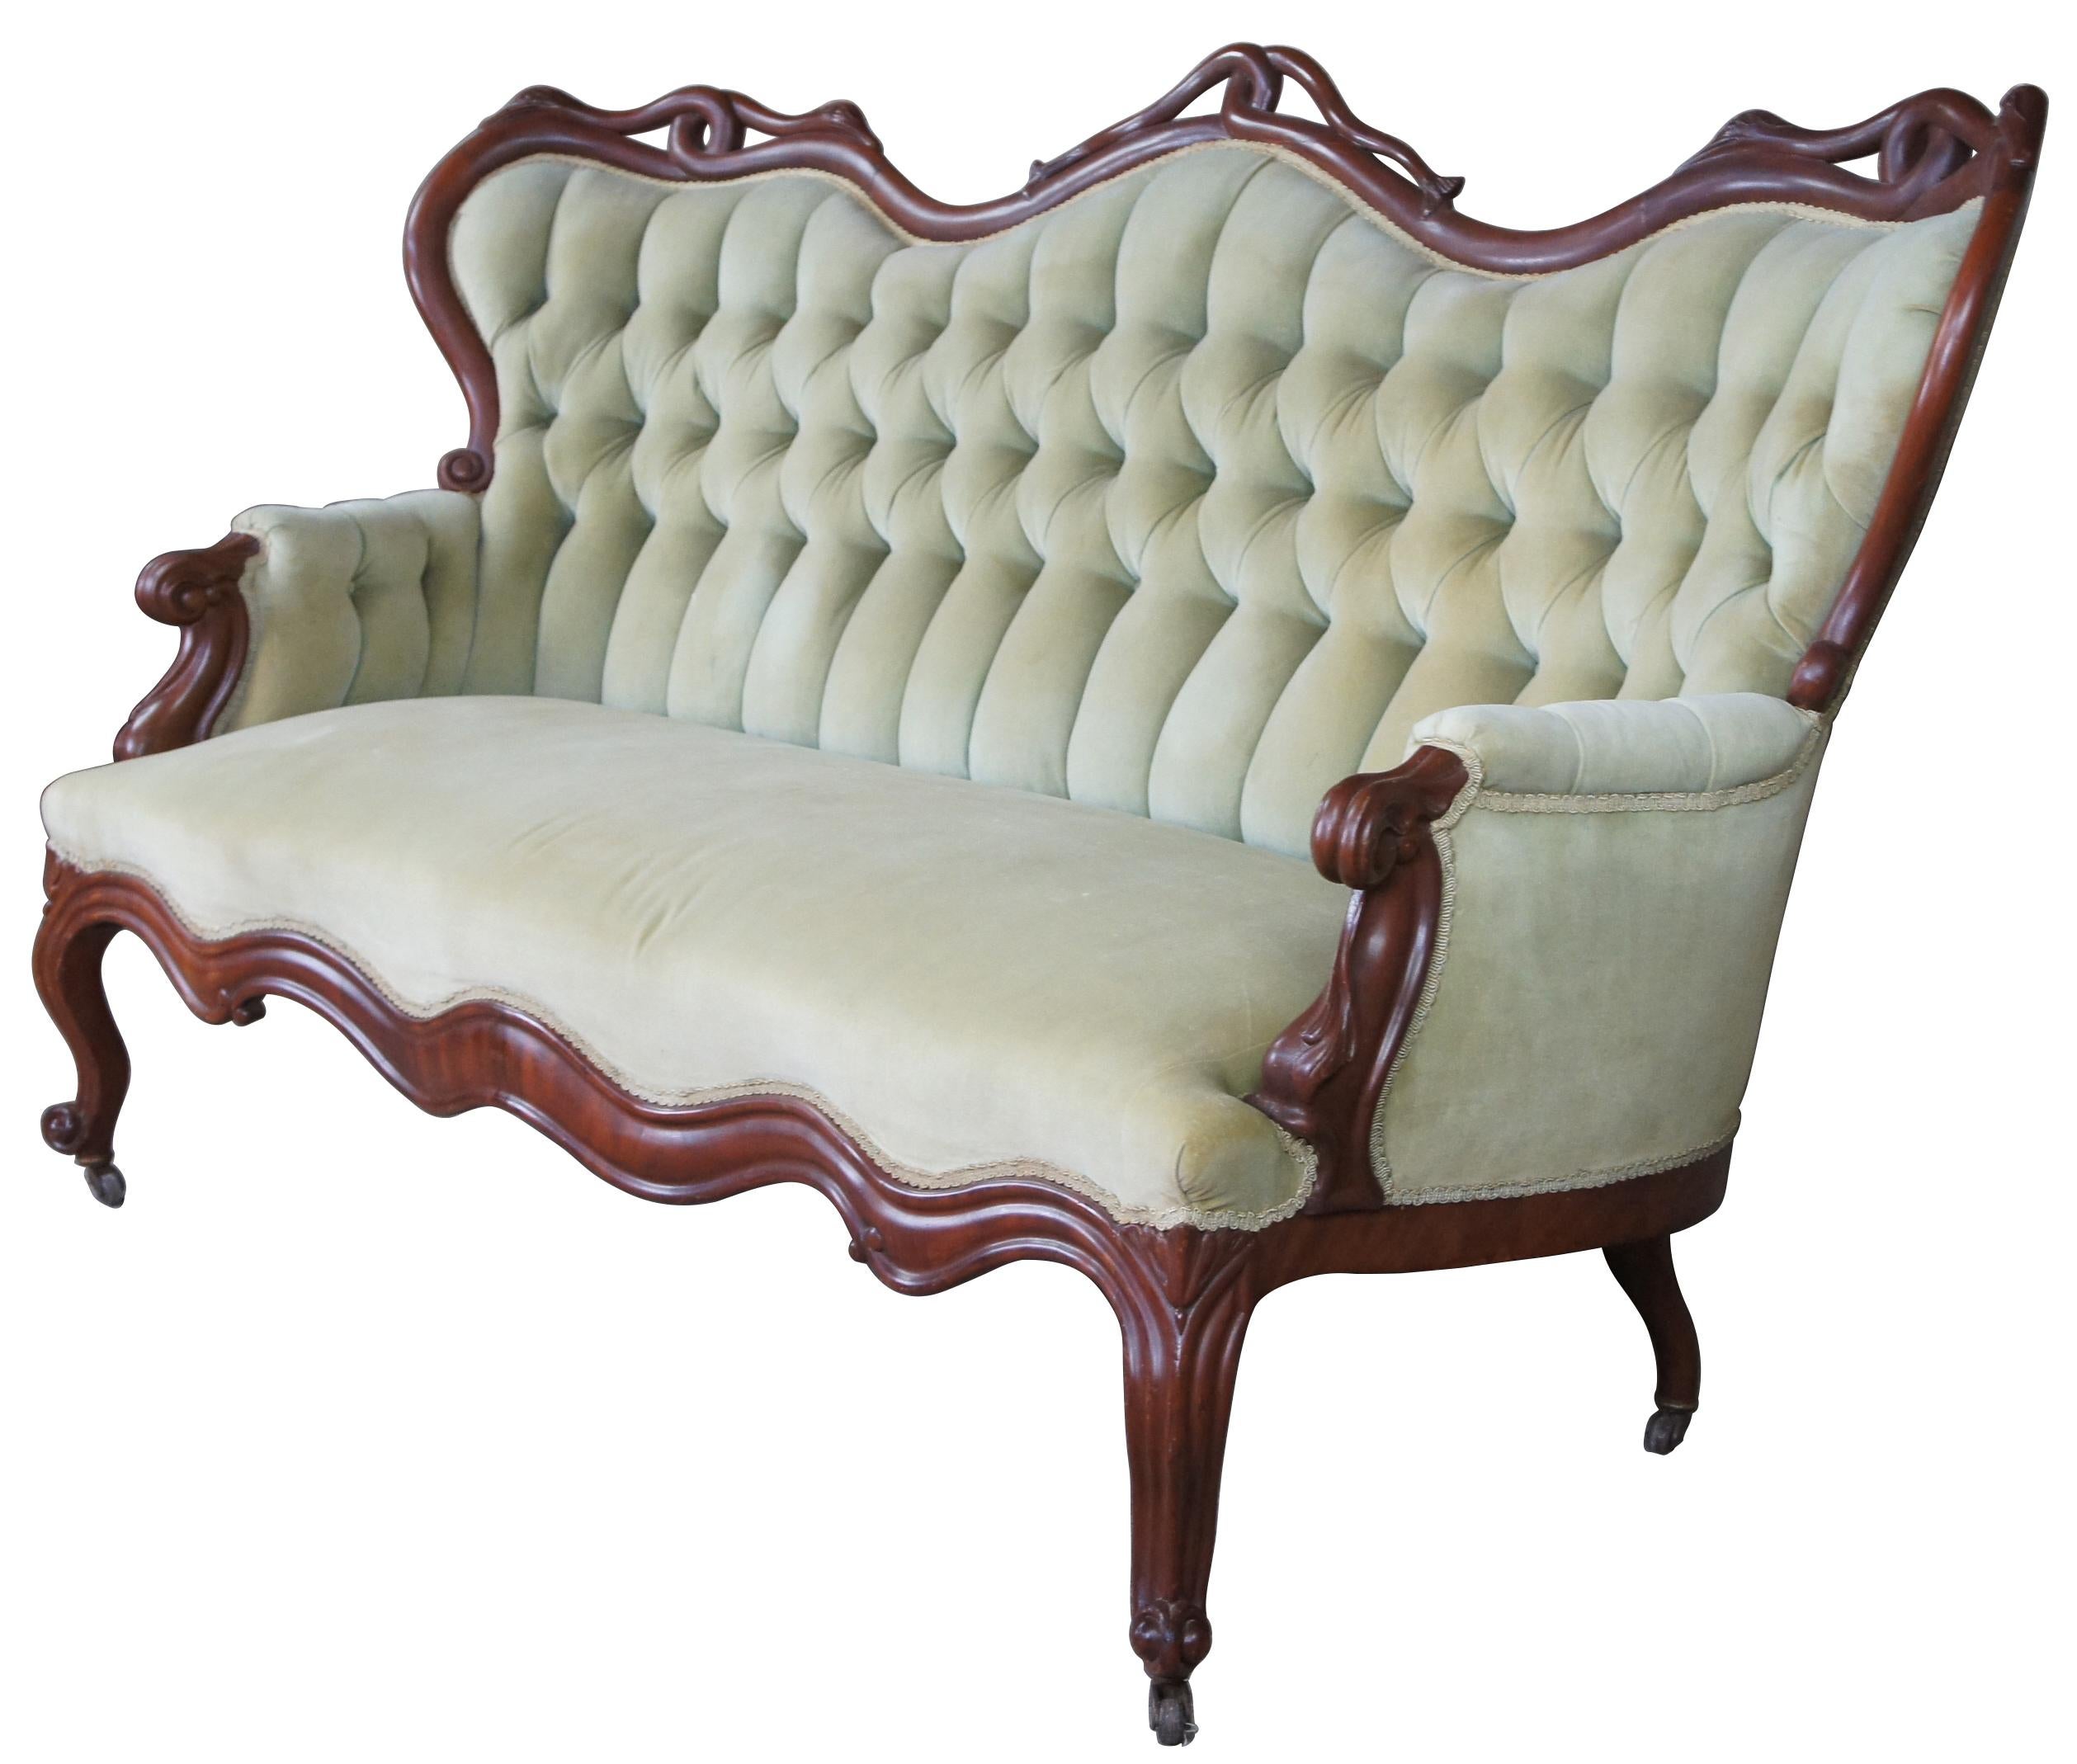 Antique Victorian carved parlor sofa or settee. Made of mahogany with serpentine form featuring carved intertwined serpents with swan like heads and fish tails along the wingbacks and tufted suede upholstery. Measures: 75